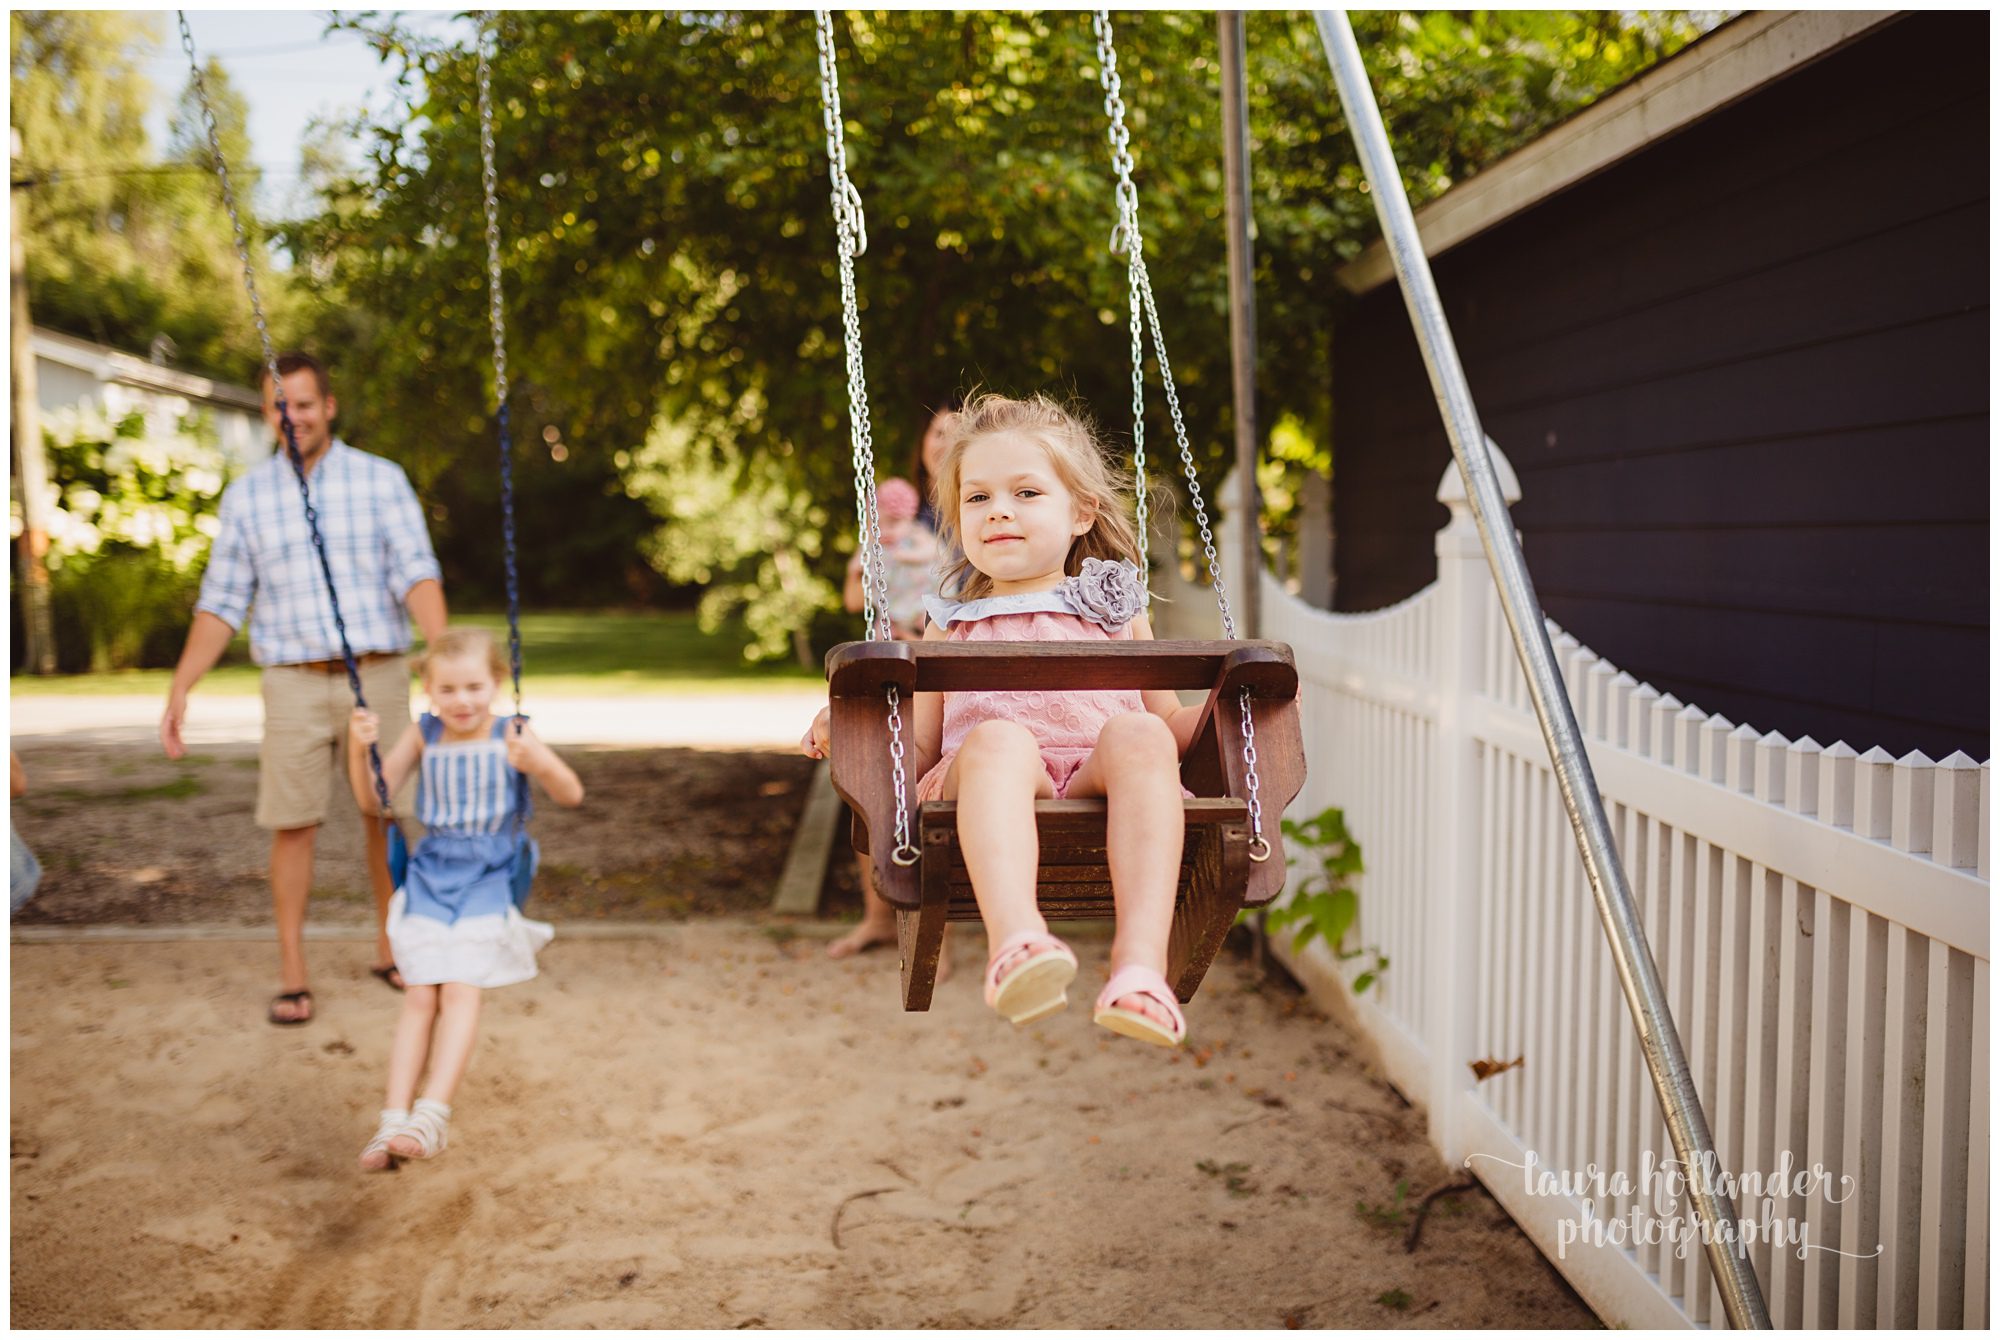 family of 6, four daughters, family portraits on the swing set, Laura Hollander Photography Battle Creek MI